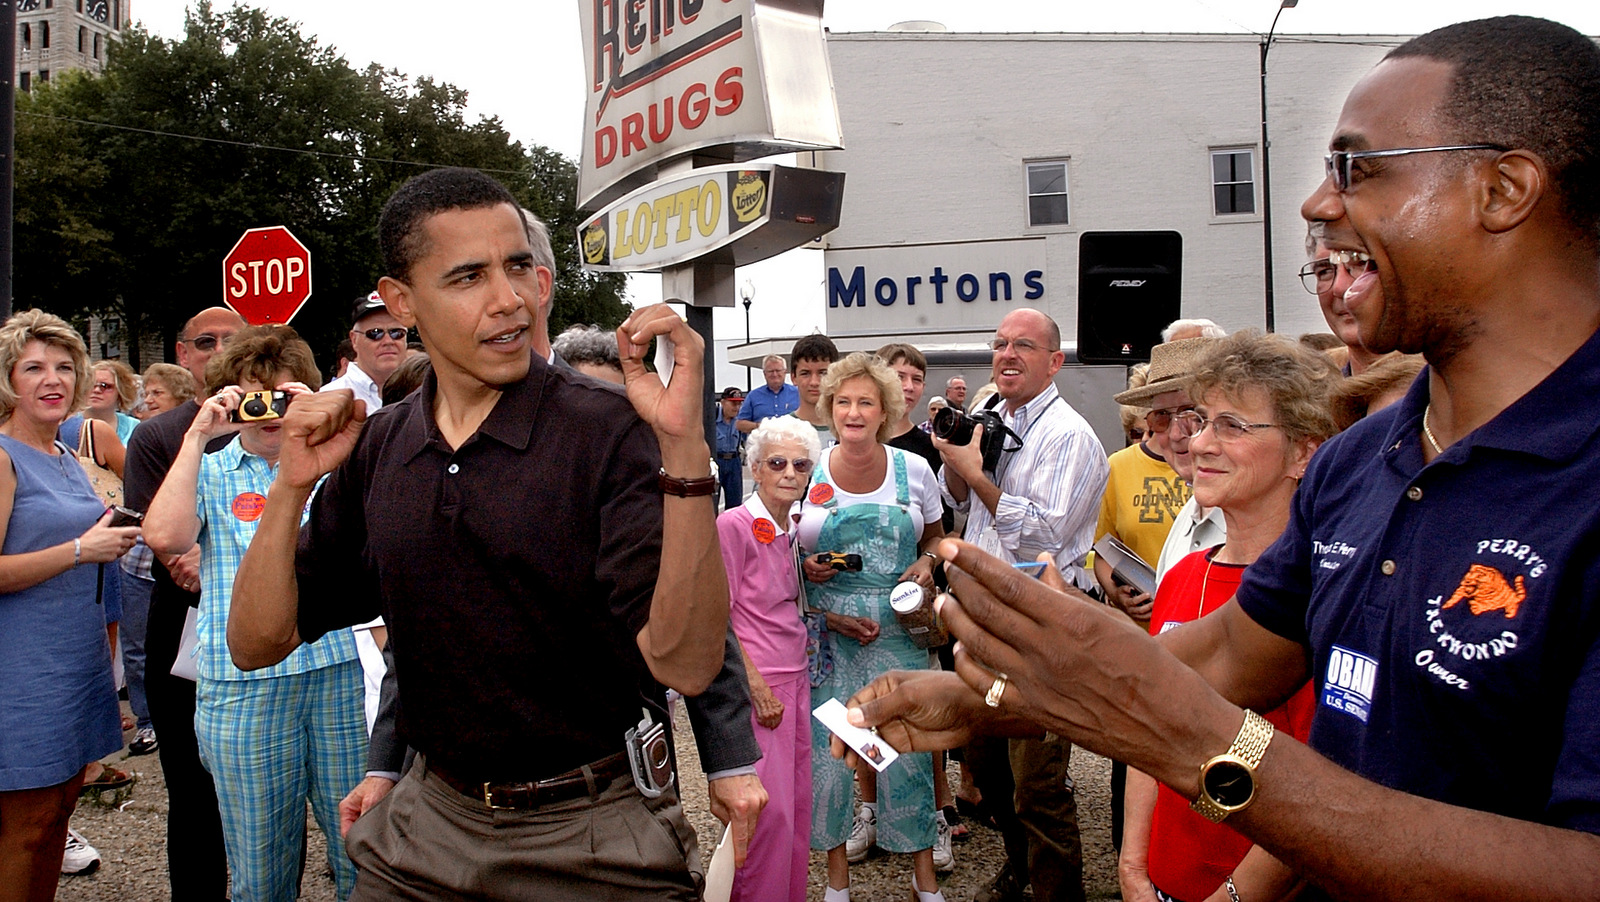 While surrounded by campaign supporters, Illinois Democratic candidate for U.S. Senate, Barack Obama, left, jokingly shows off his Tae Kwon-Do skills while attending a Christian County Democrats rally in Taylorville, Ill., Aug 4, 2004. (AP/Seth Perlman)